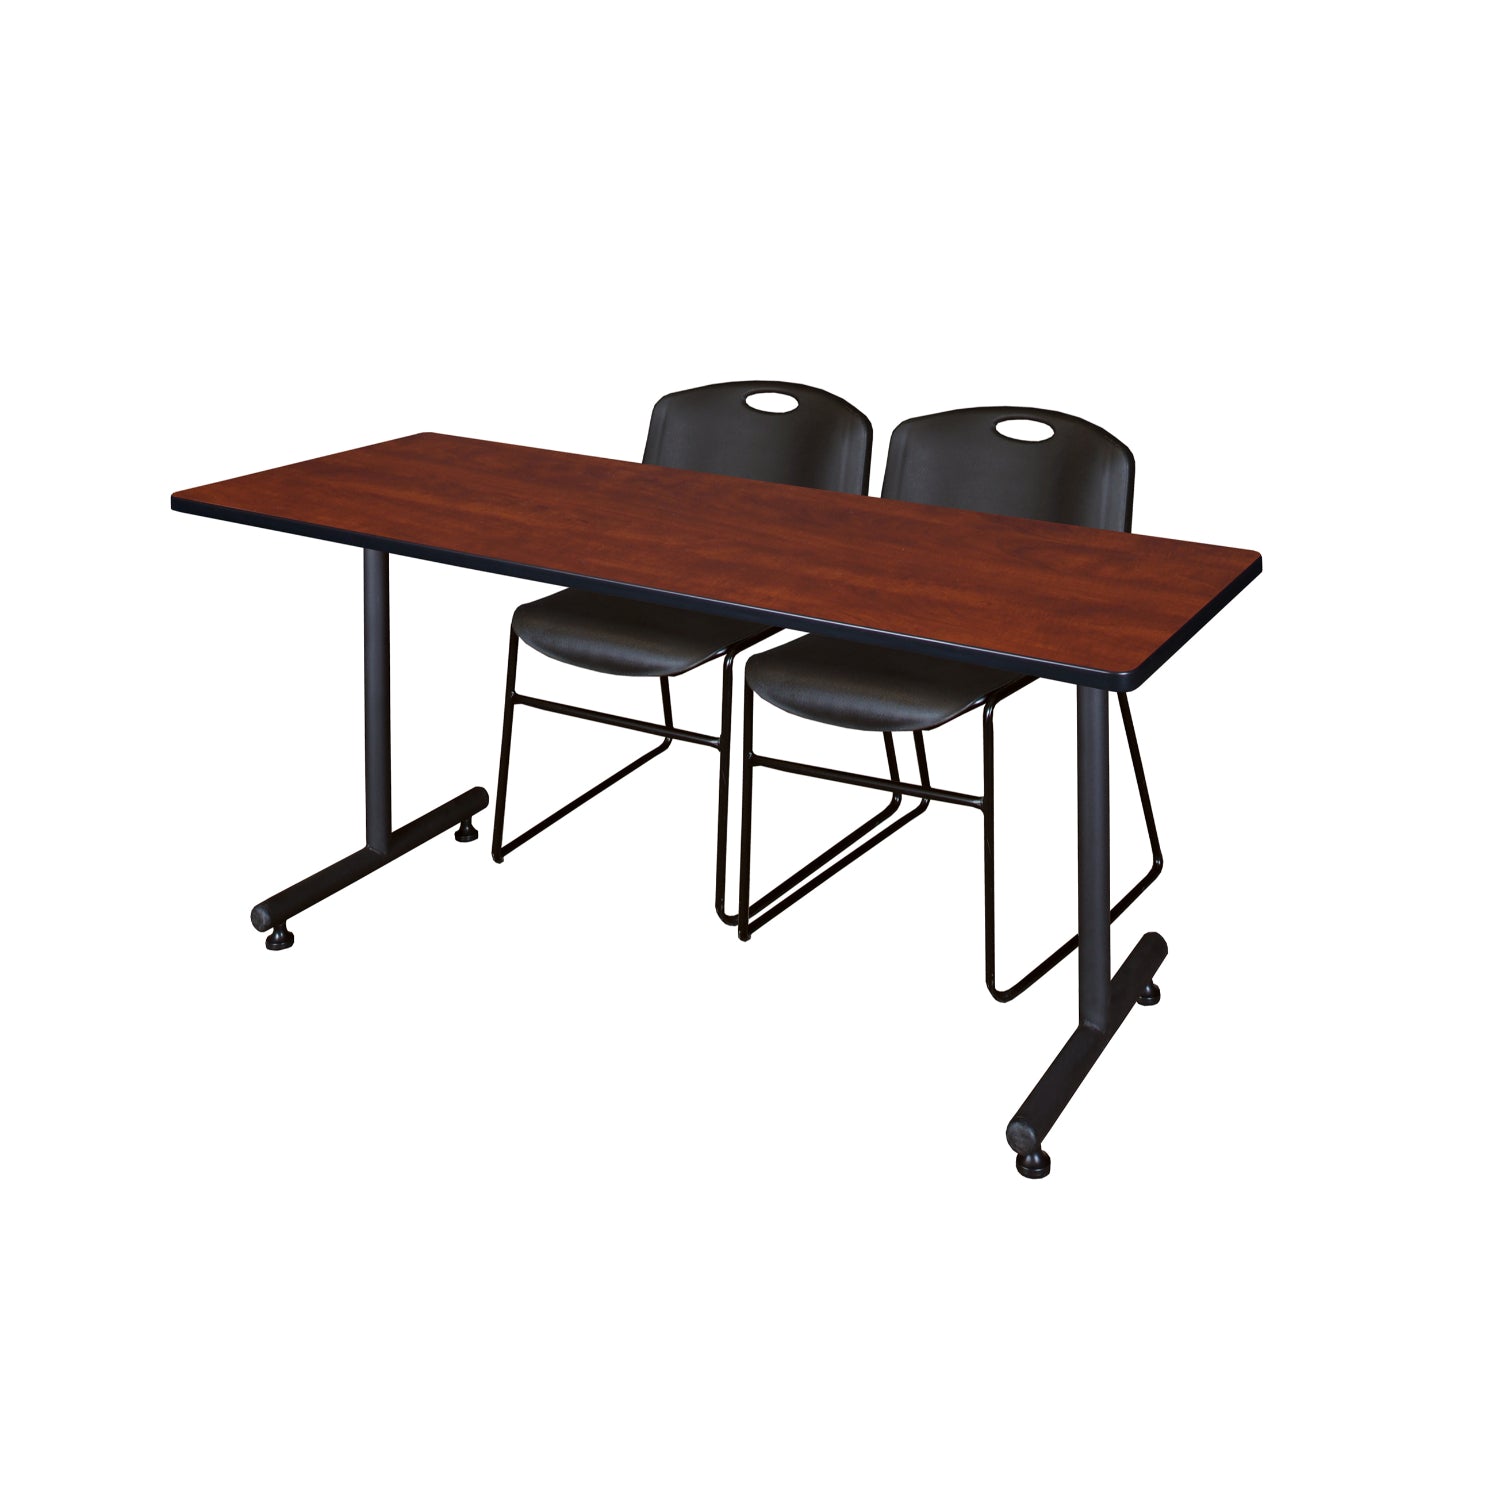 Kobe Training Table and Chair Package, Kobe 60" x 24" T-Base Training/Seminar Table with 2 Zeng Stack Chairs